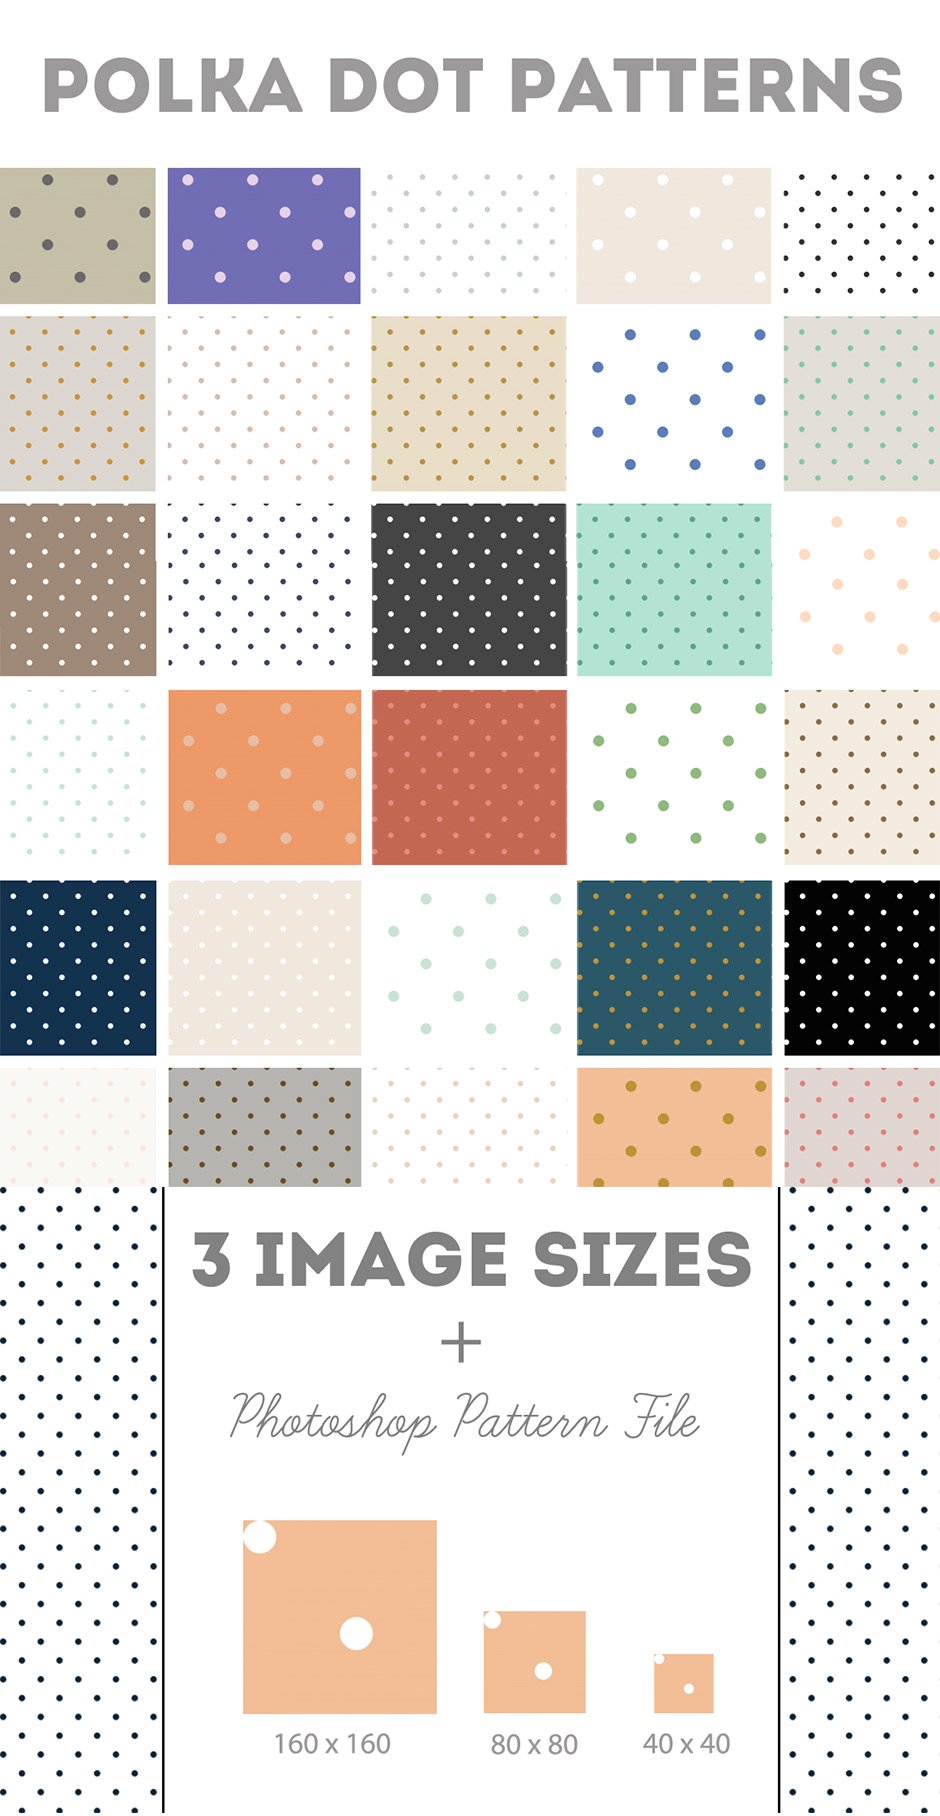 The Extensive Textures, Patterns and Backgrounds Bundle